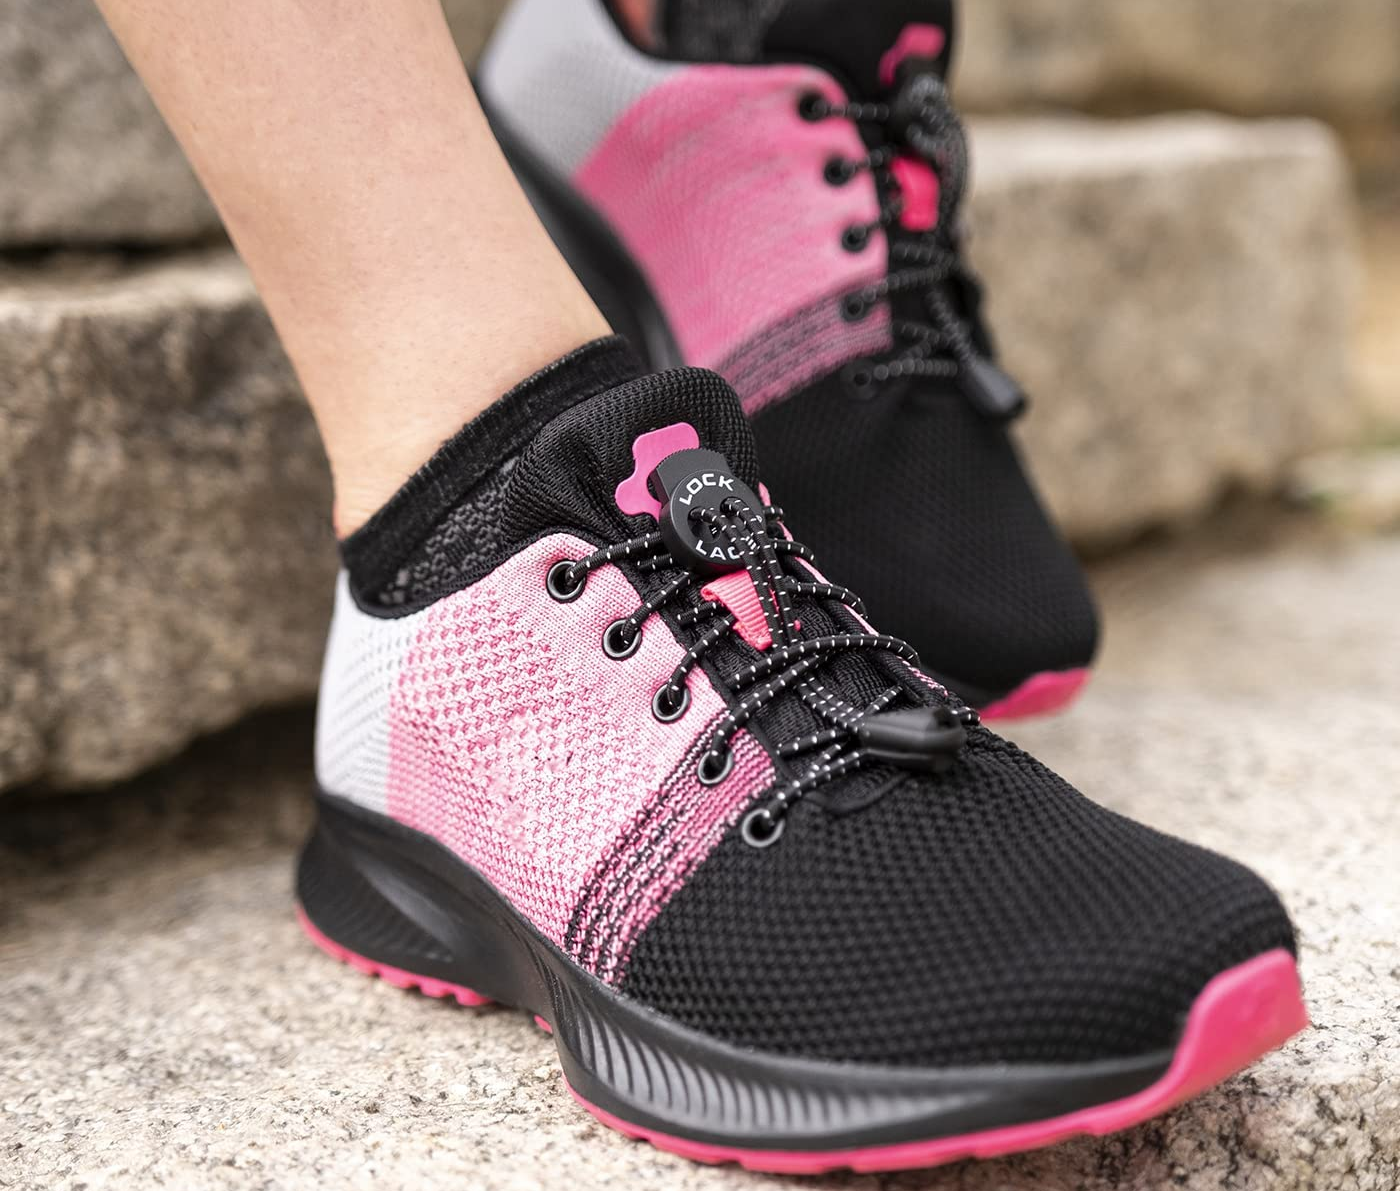 the lock laces on a pair of black and pink sneakers that a model is wearing